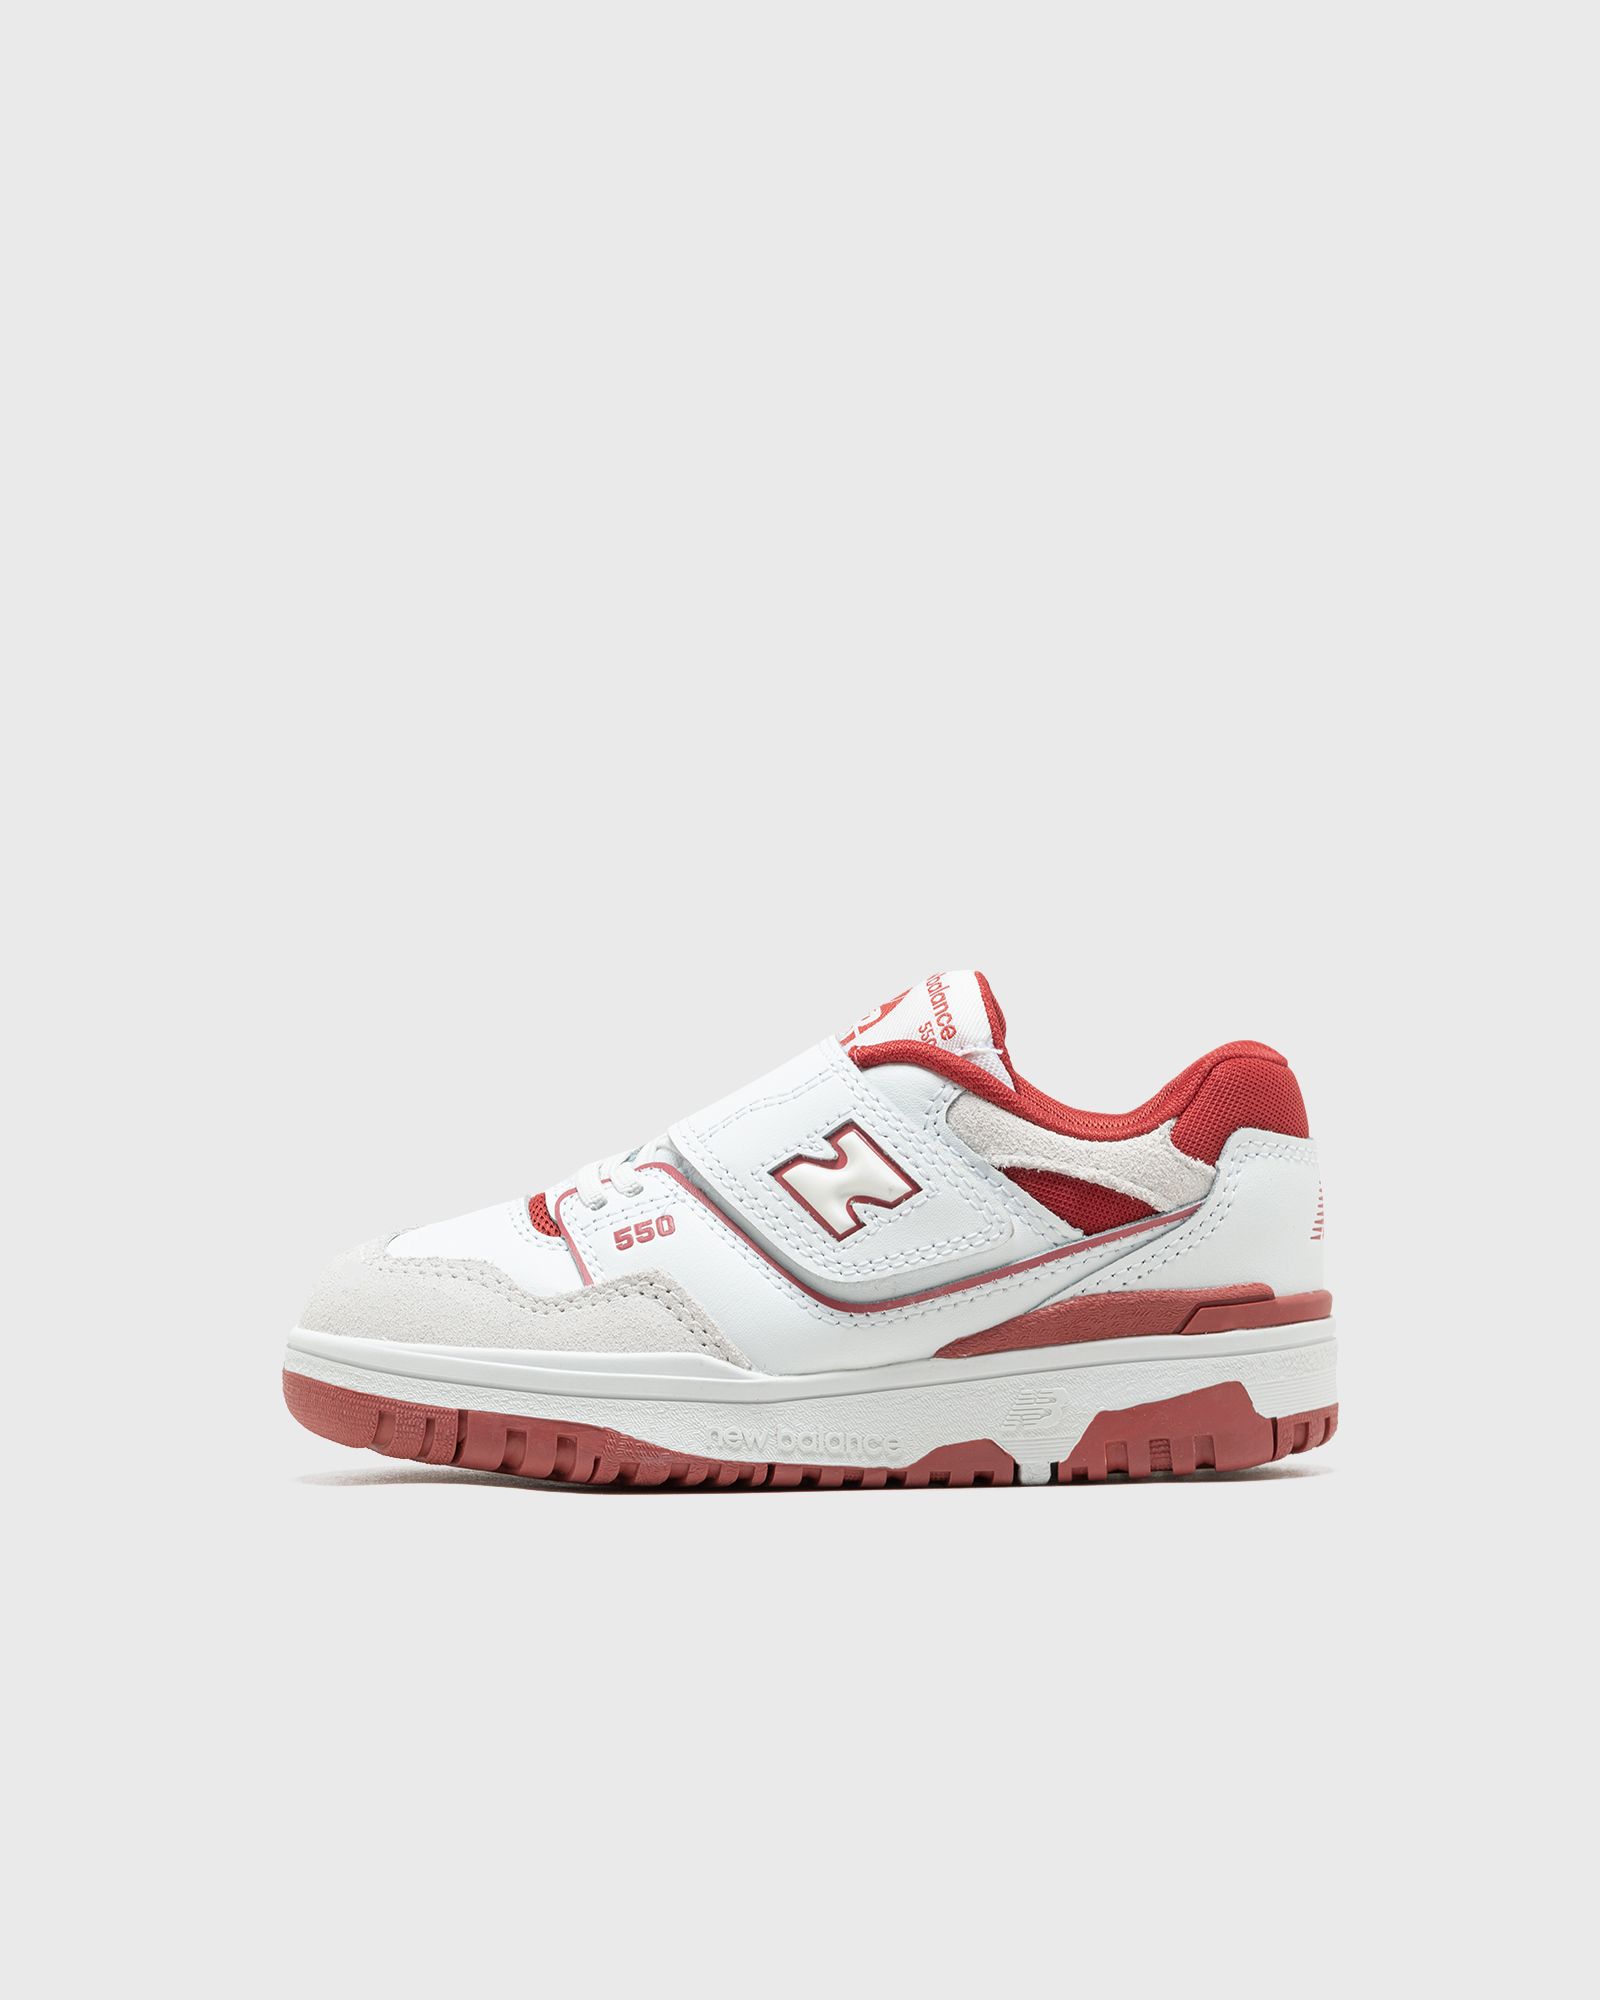 New Balance - phb550v1  sneakers red|white in größe:30